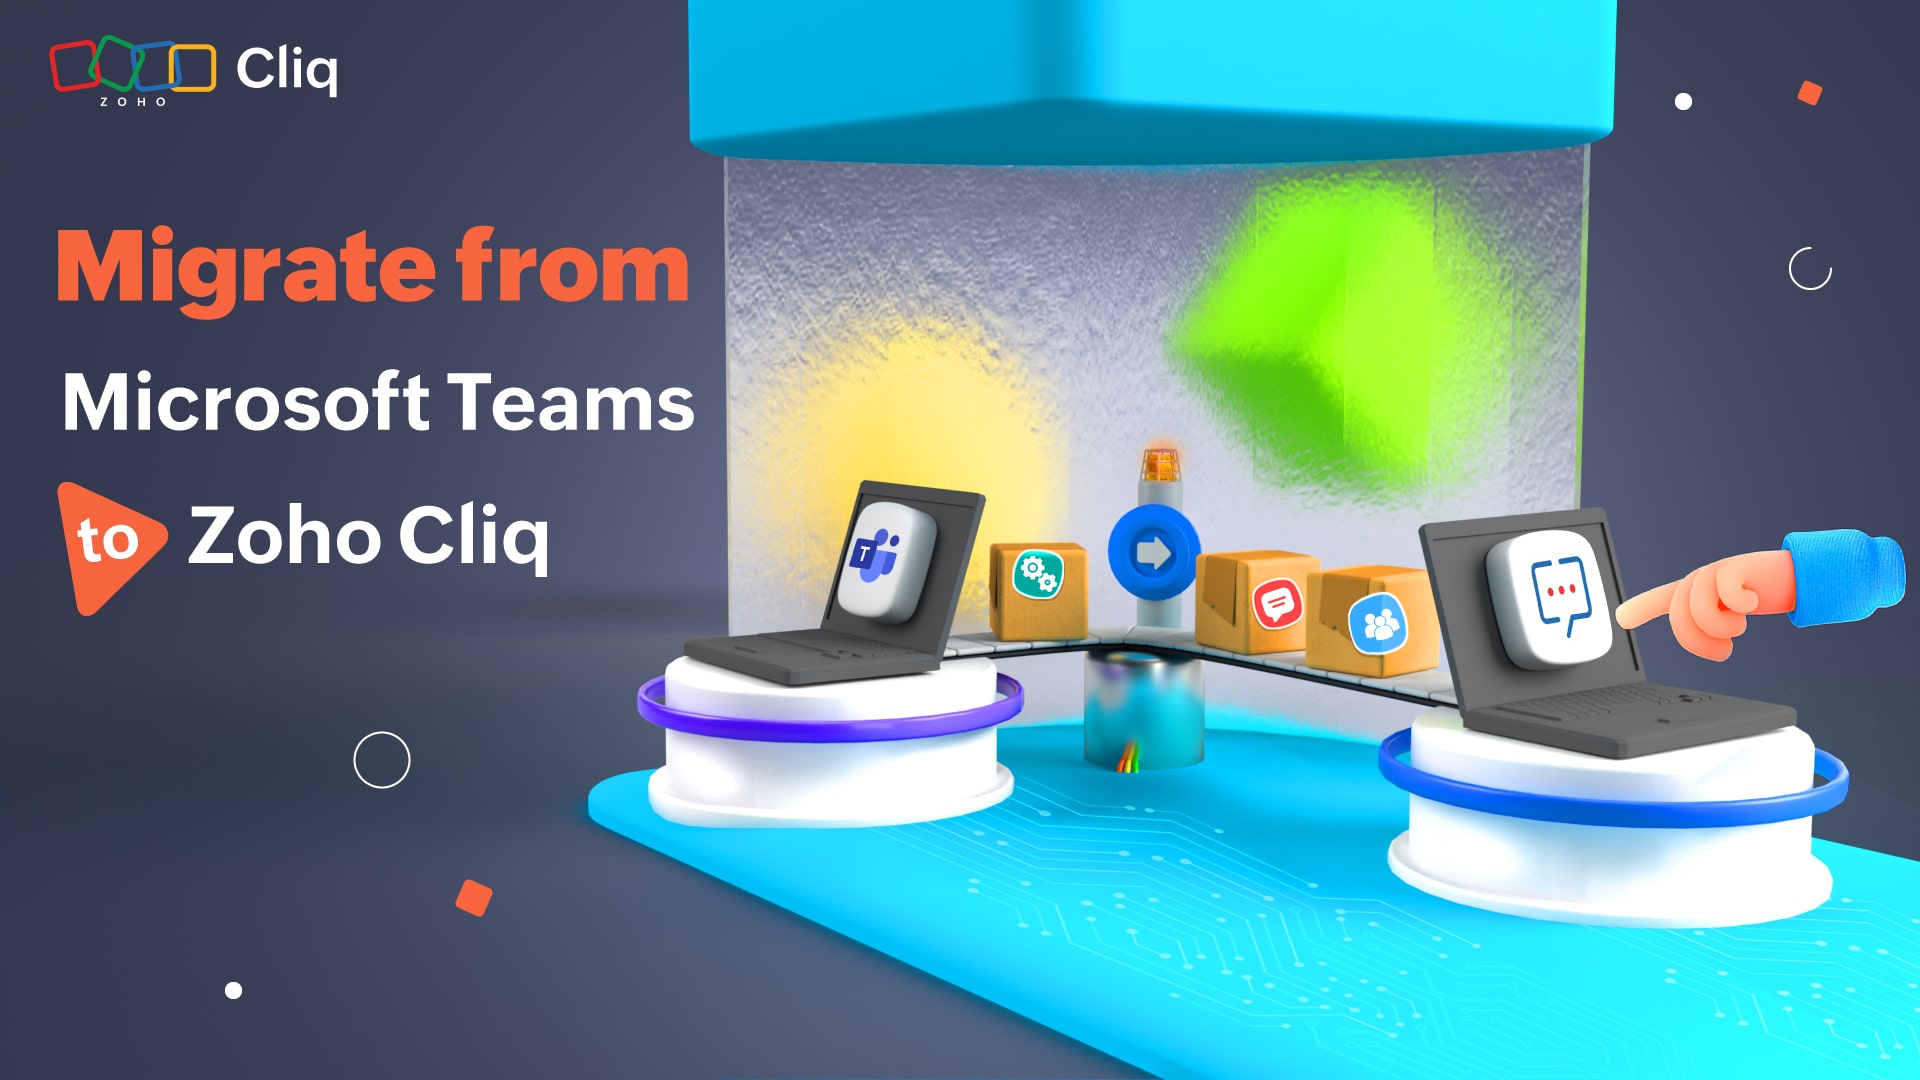 Make a free switch from MS Teams to Zoho Cliq